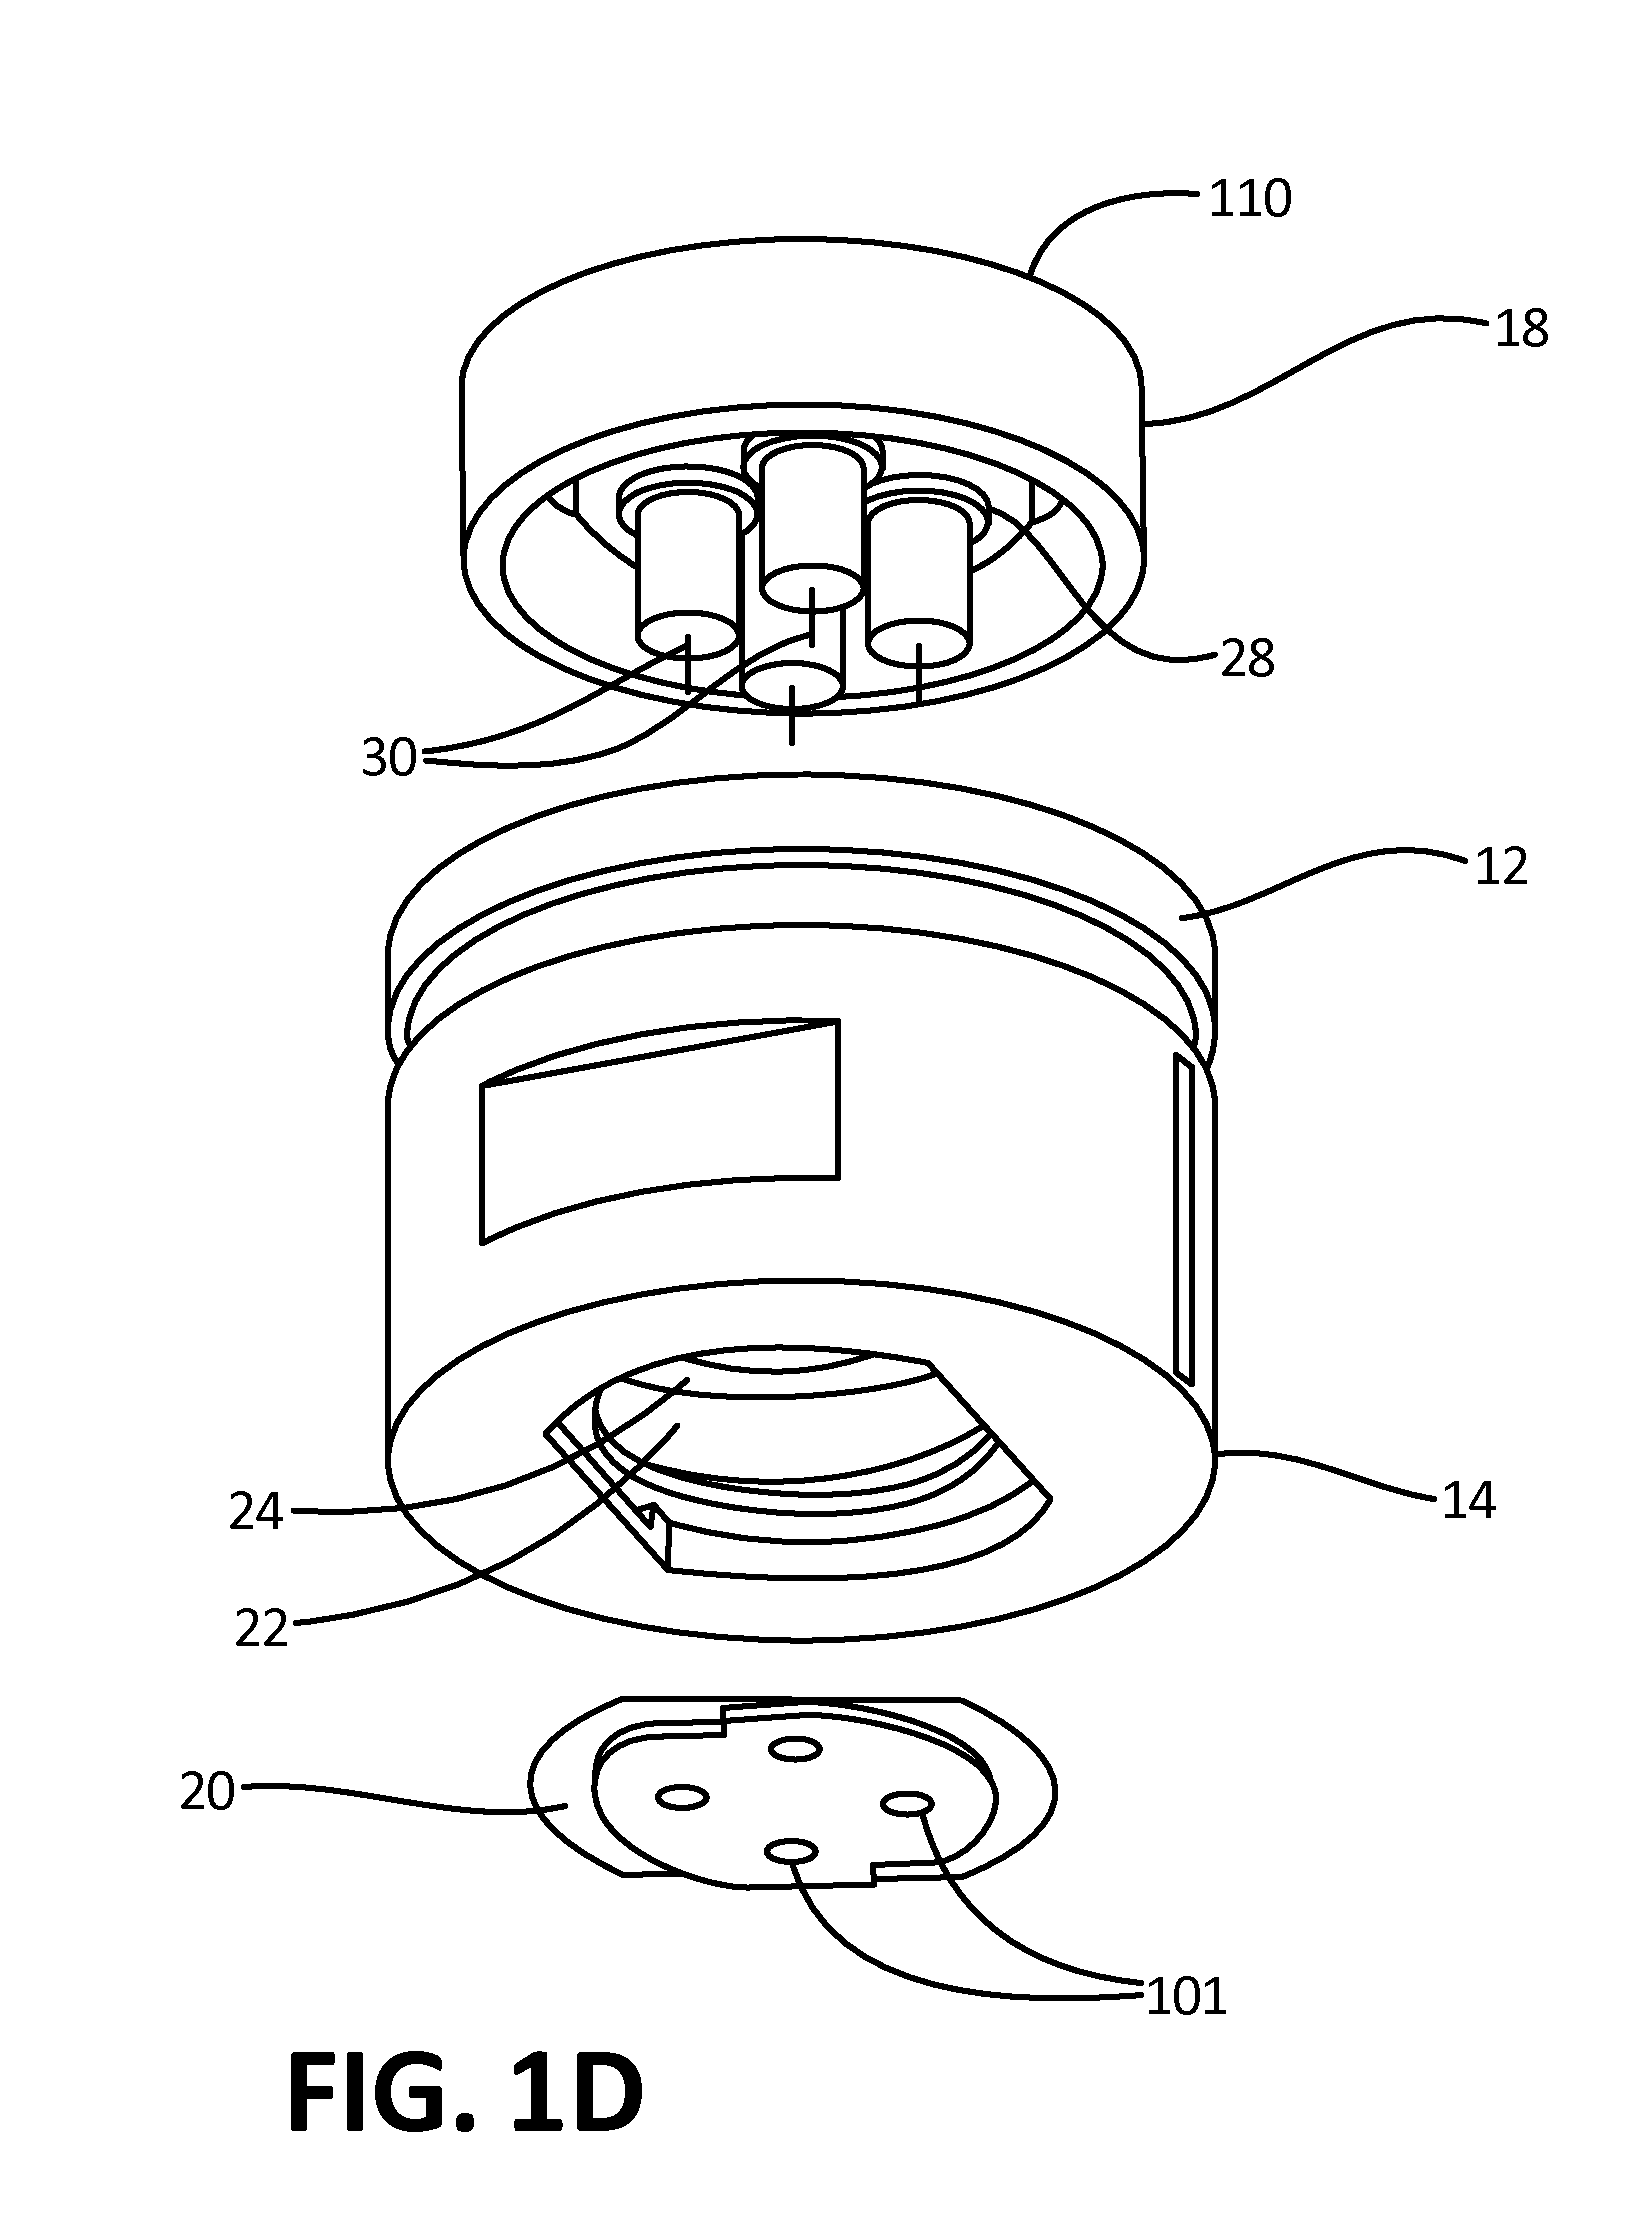 Devices, systems and methods for gravity-enhanced microfluidic collection, handling and transferring of fluids